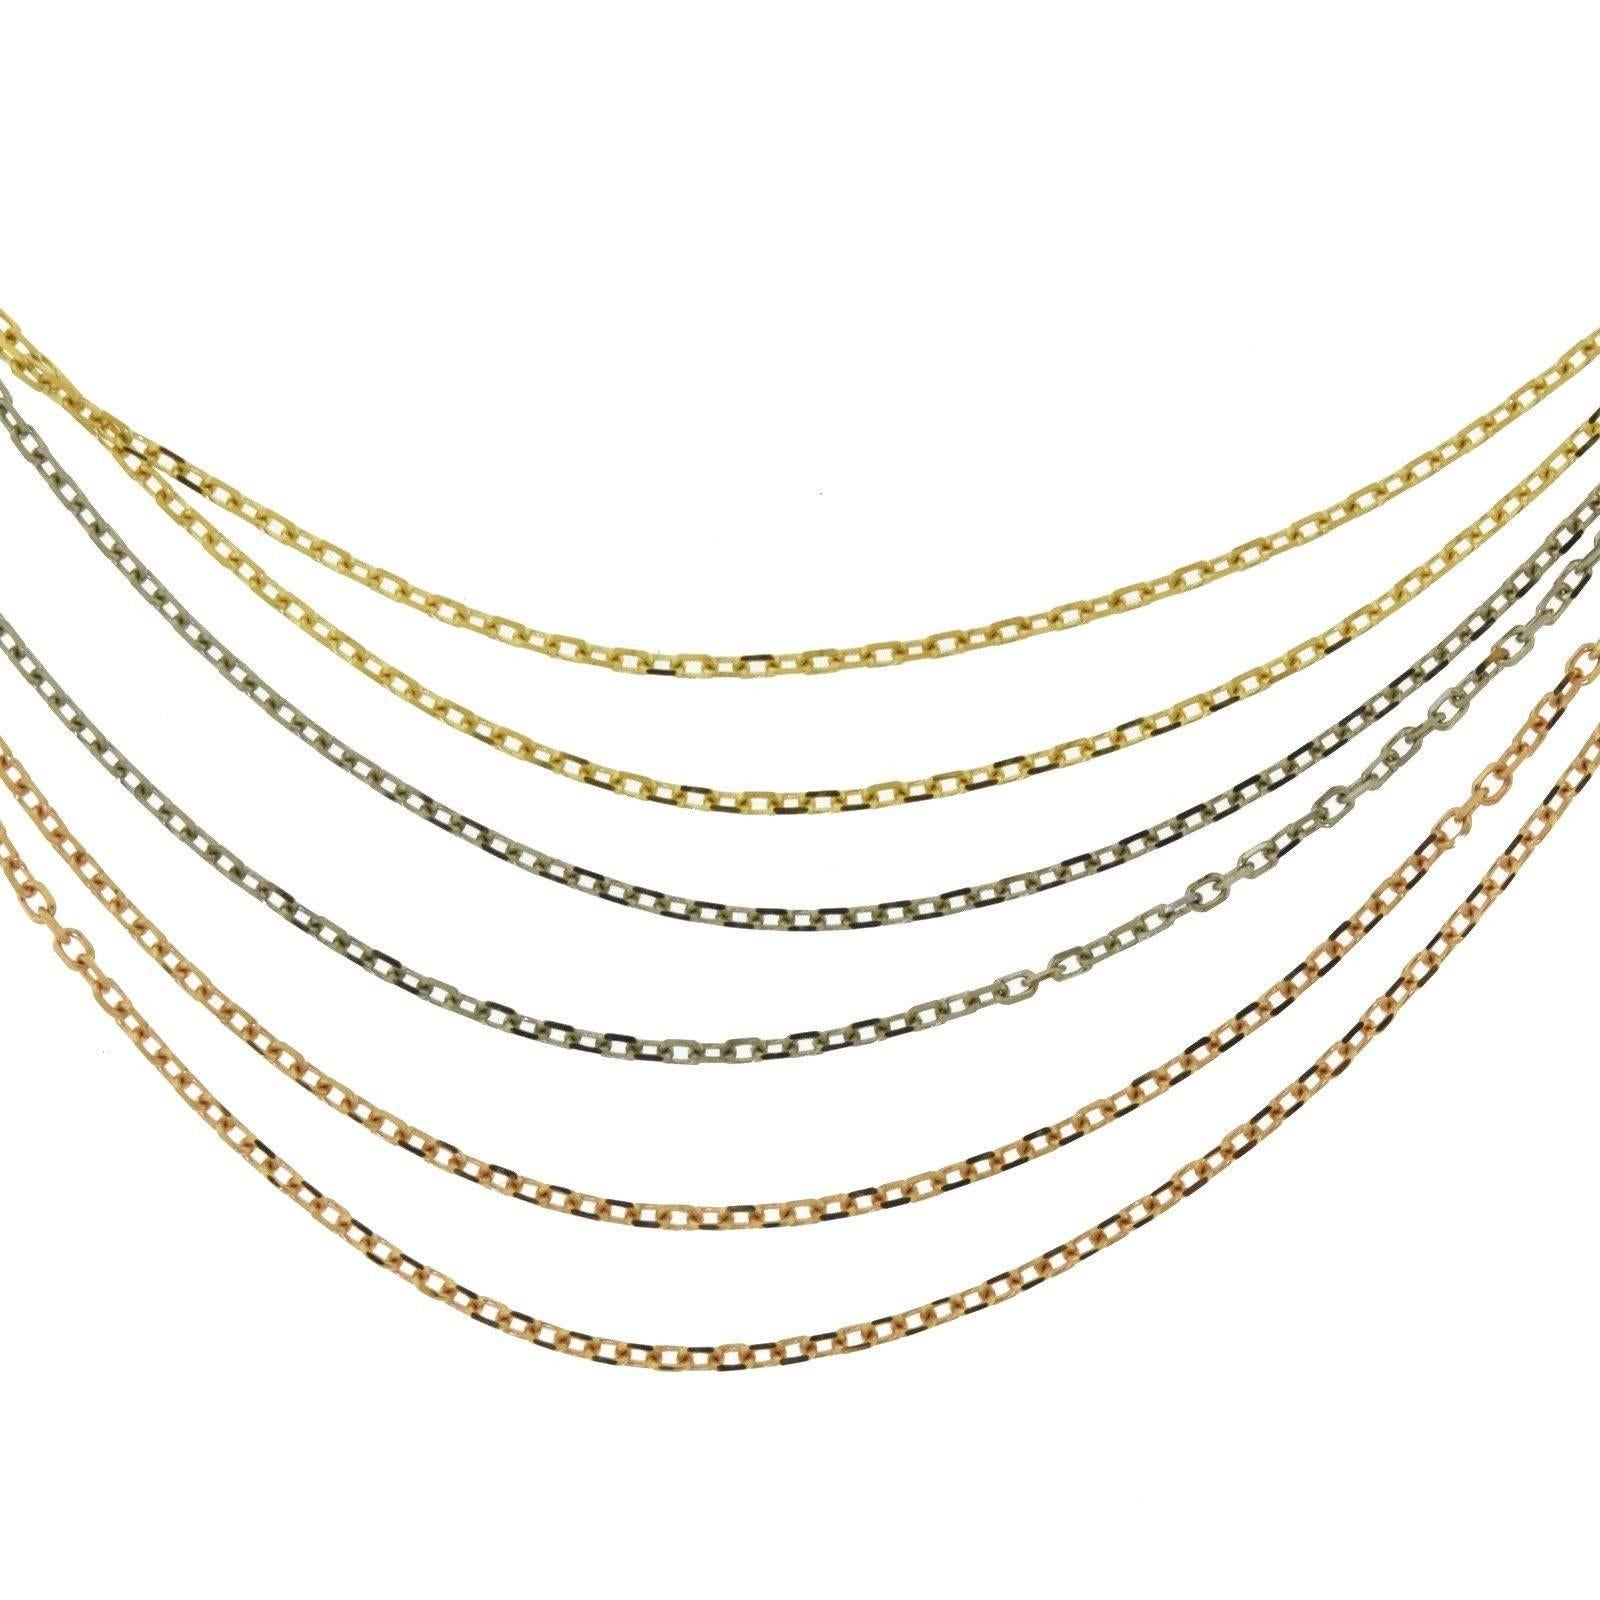 Designer: Cartier

Collection: Trinity de Cartier

Metal: Yellow Gold

                 Rose Gold

                 White Gold

Metal Purity: 18k

Total Item Weight (g): 22.9

Necklace Length: 16 inches

Trinity Circle Diameter: 0.75